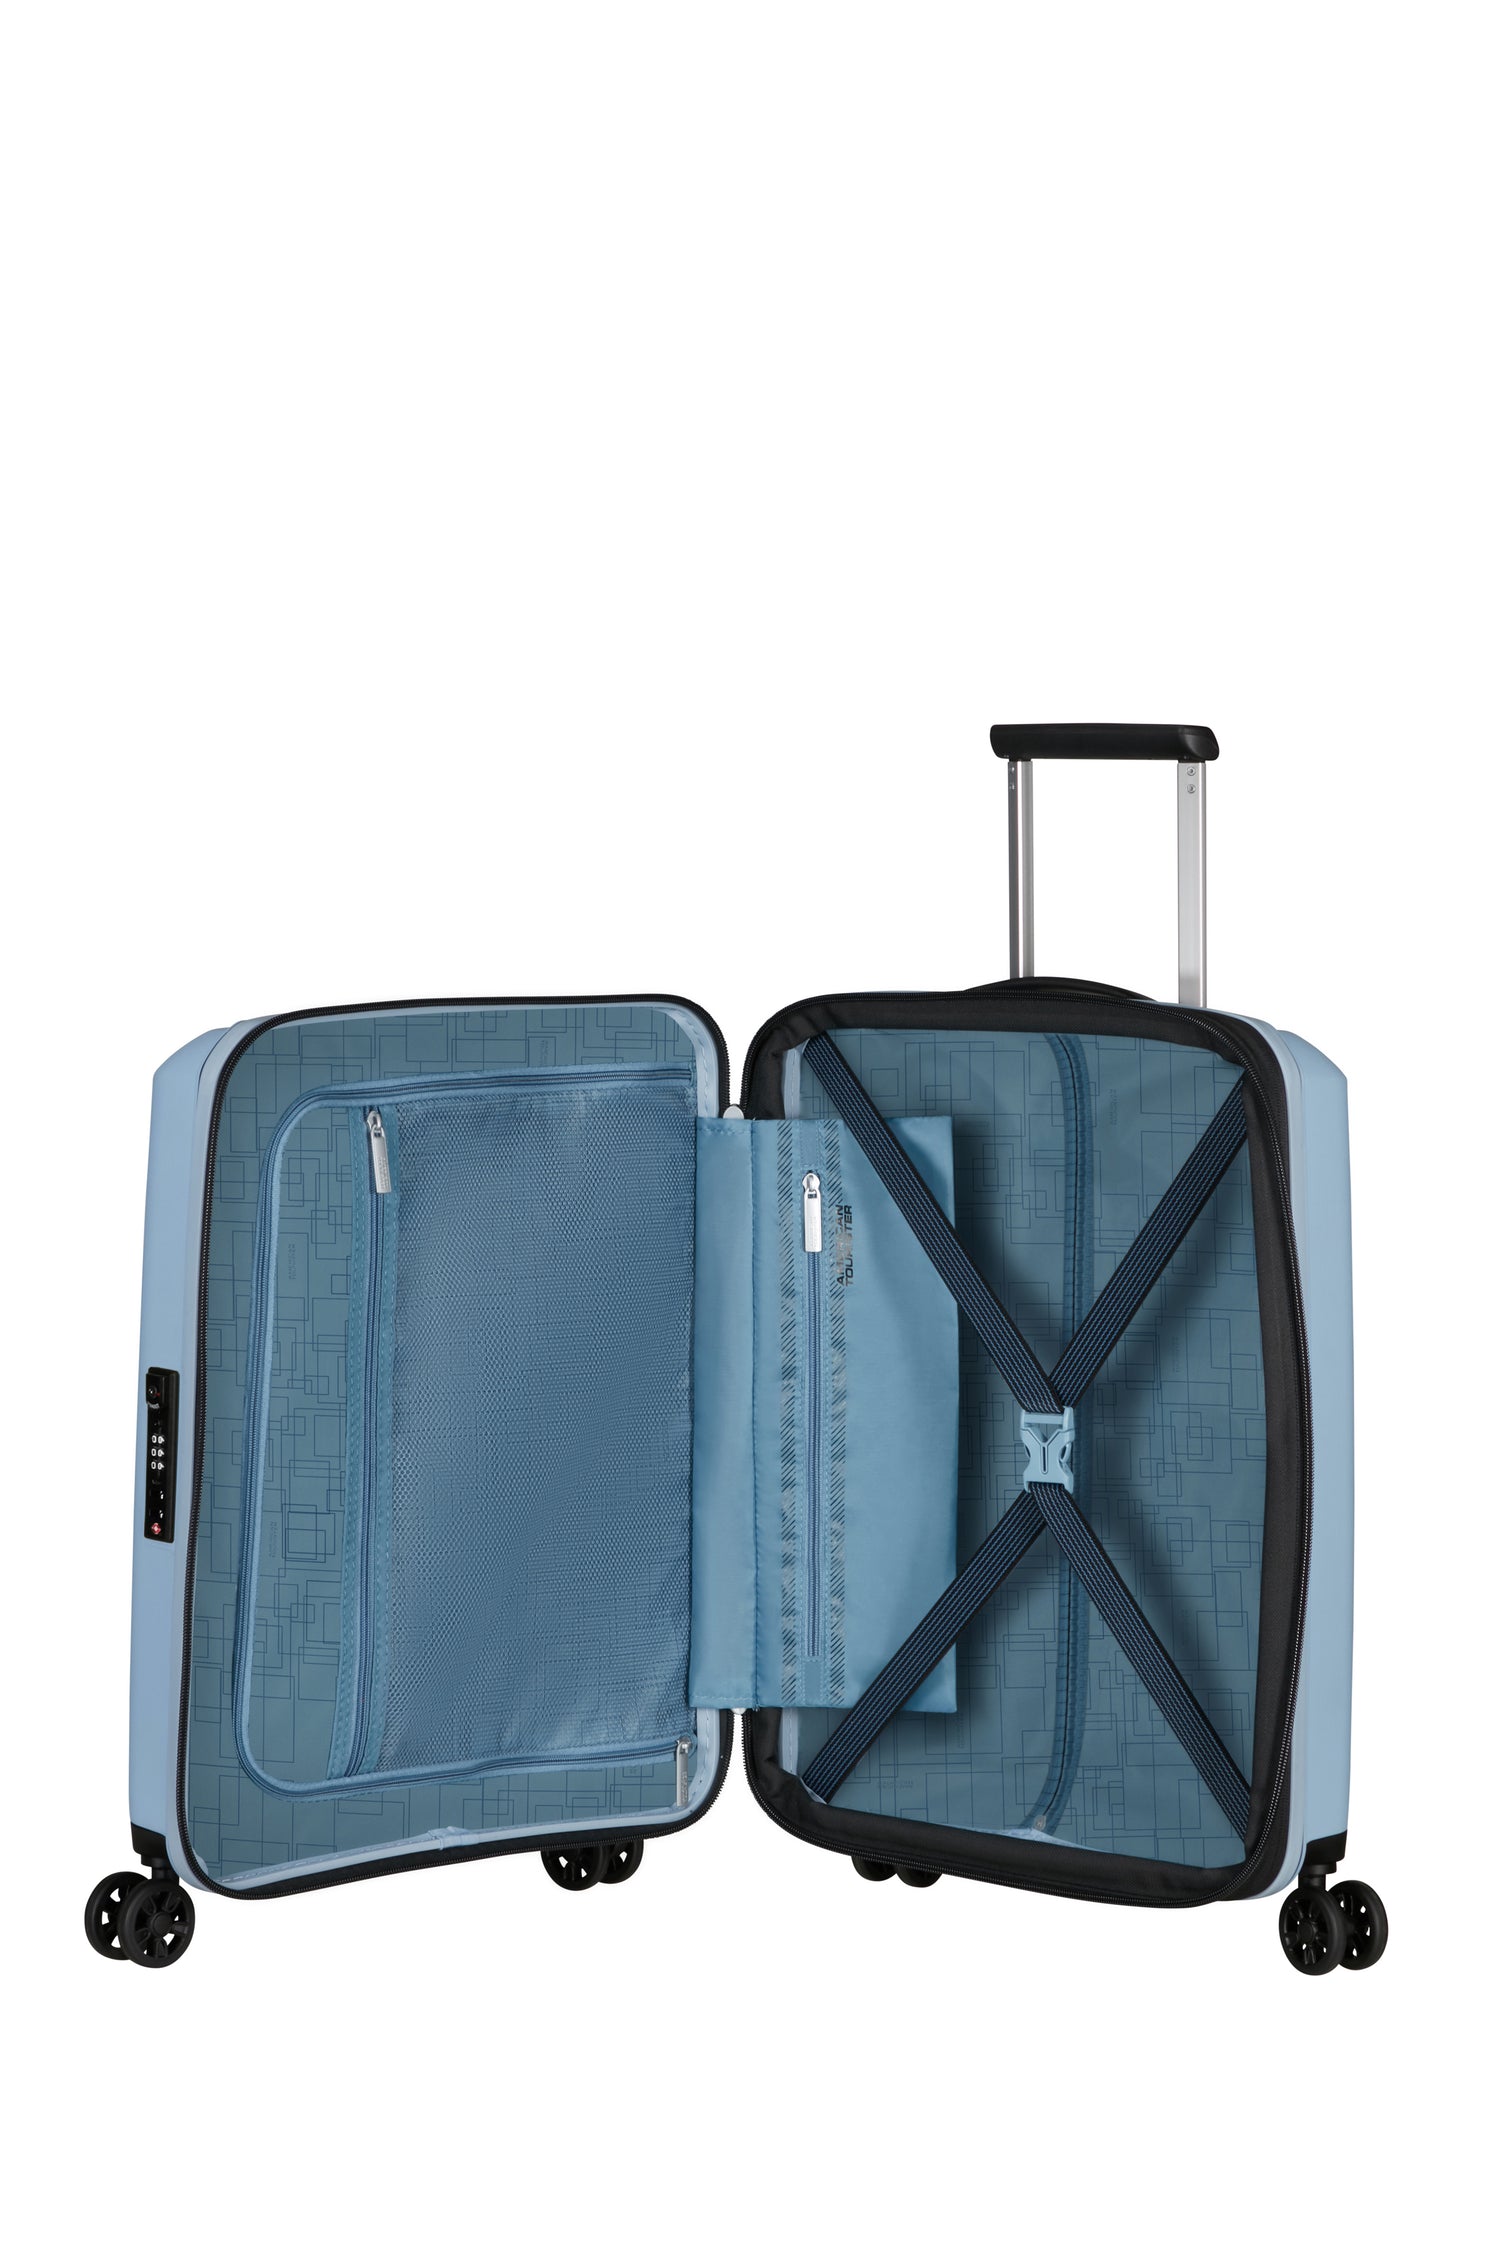 American Tourister Aerostep Cabin 55cm Expandable Spinner